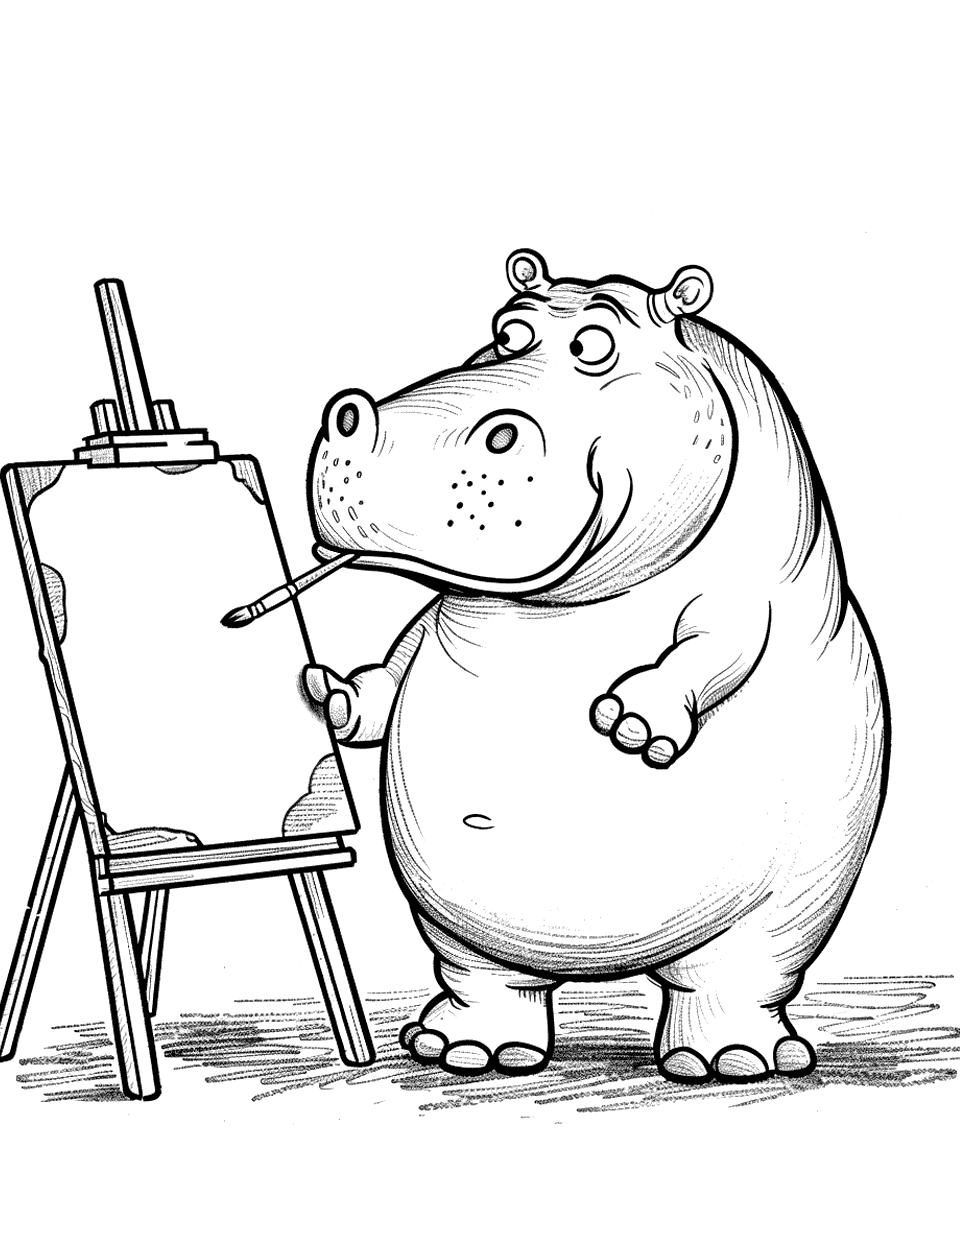 Hippo Artist Coloring Page - A hippo ready to paint a masterpiece on a canvas.